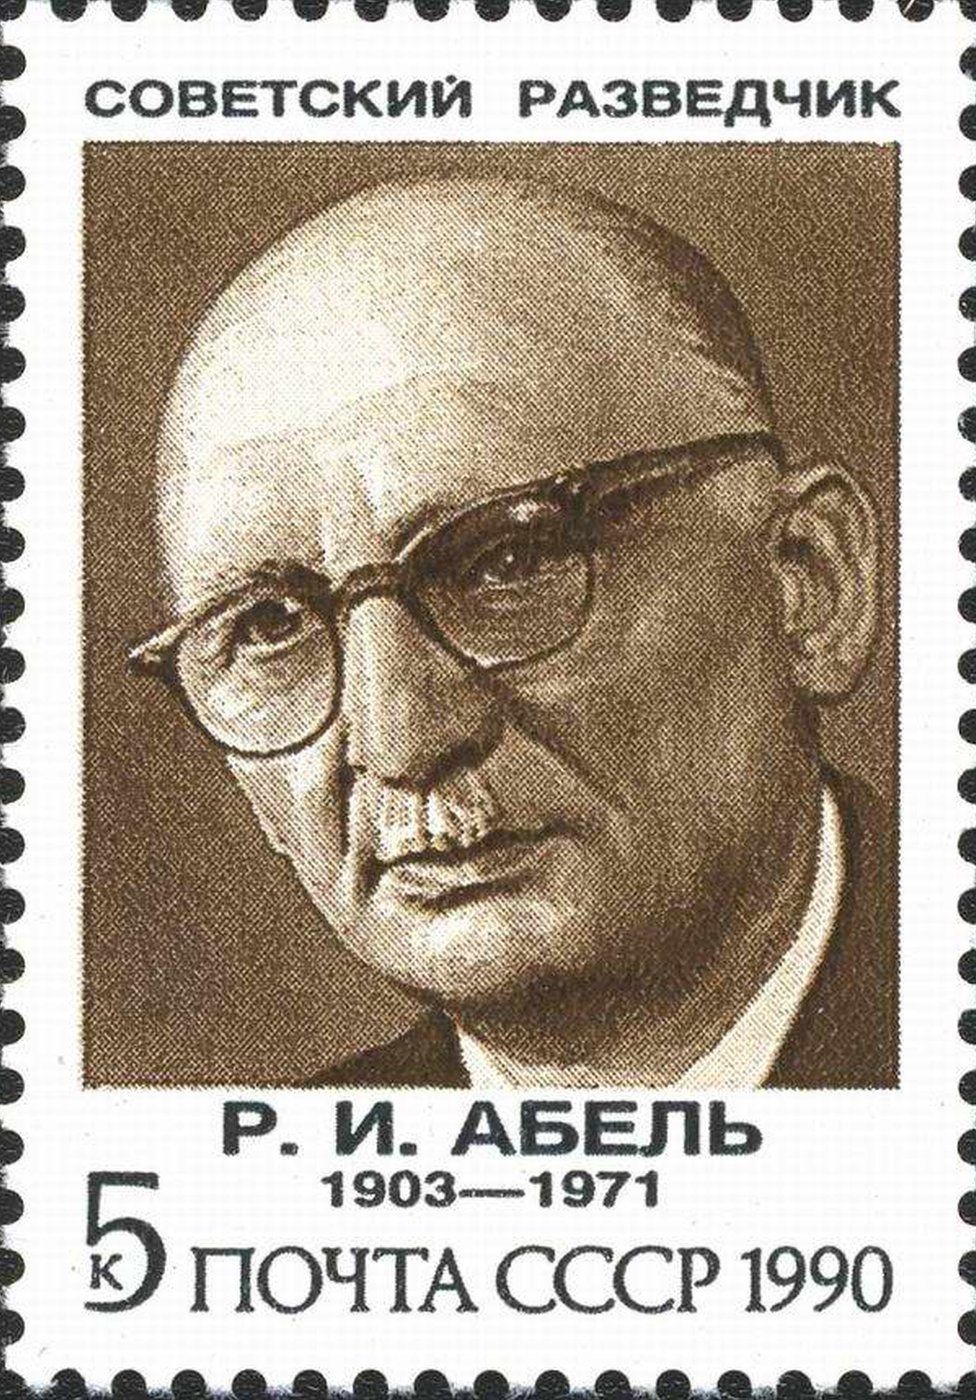 A Russian stamp bearing the image of the Russian spy